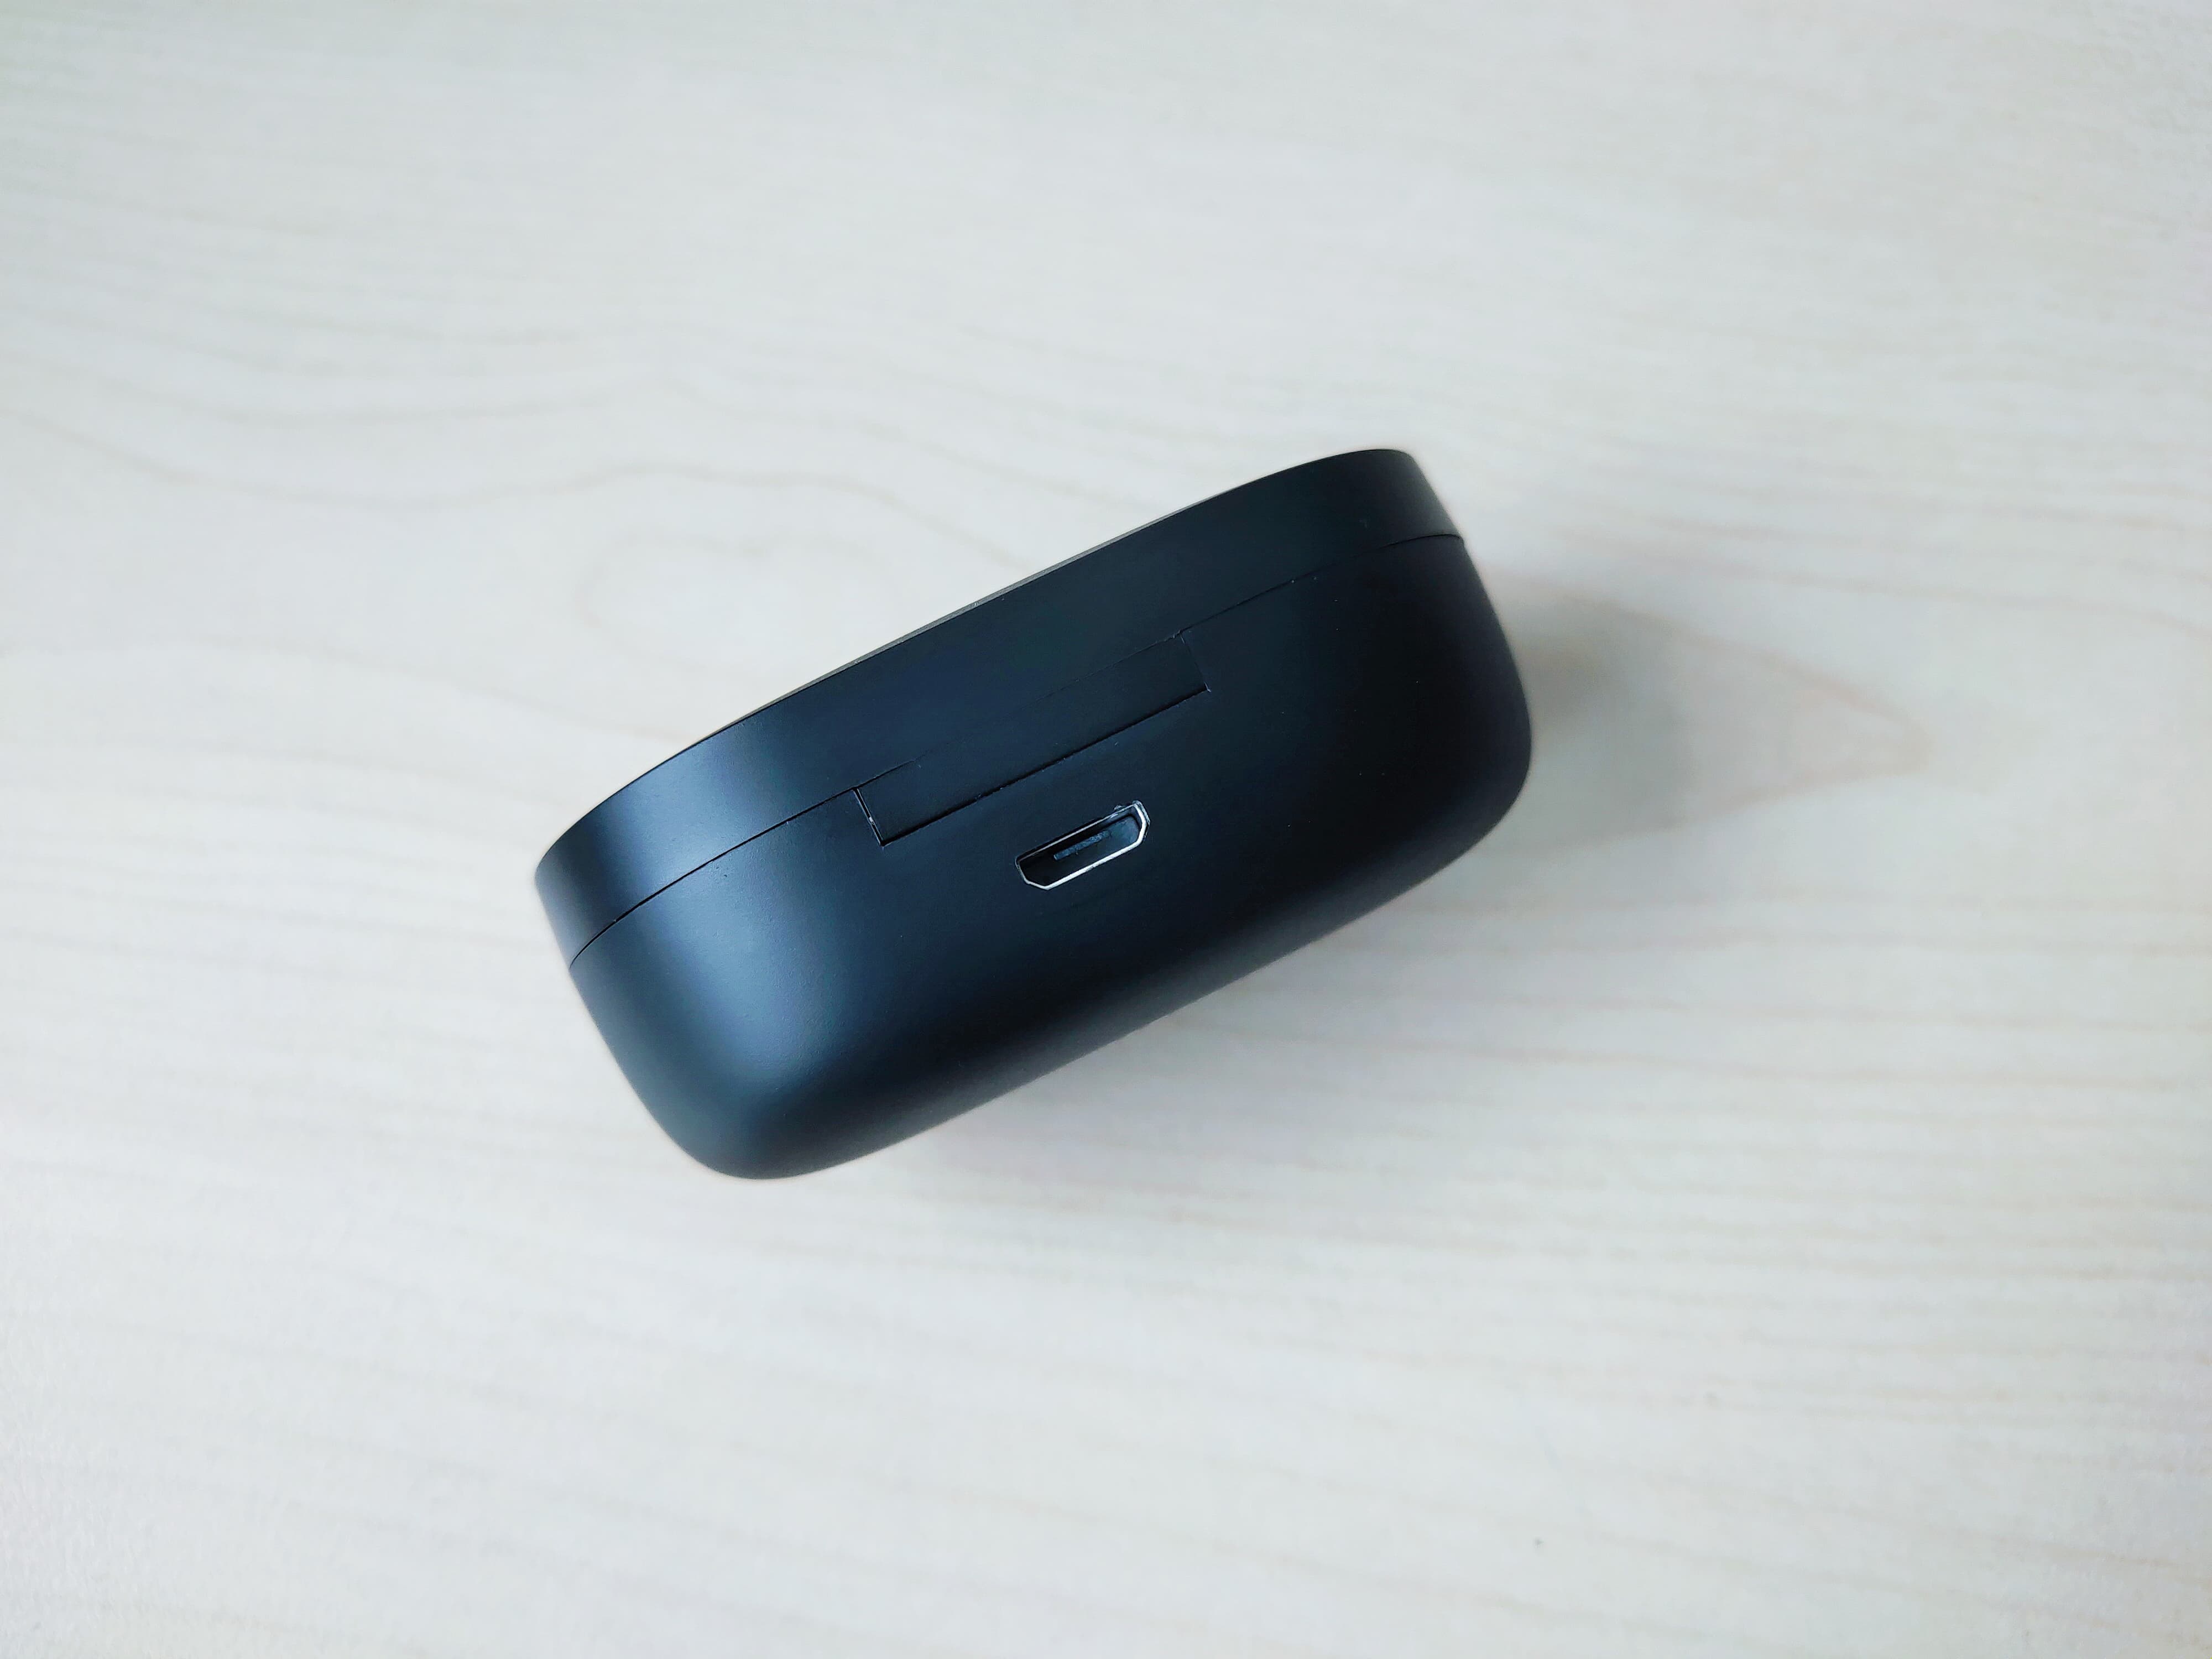 Redmi AirDots 2 out of the box: just 79 yuan to buy it with your eyes closed